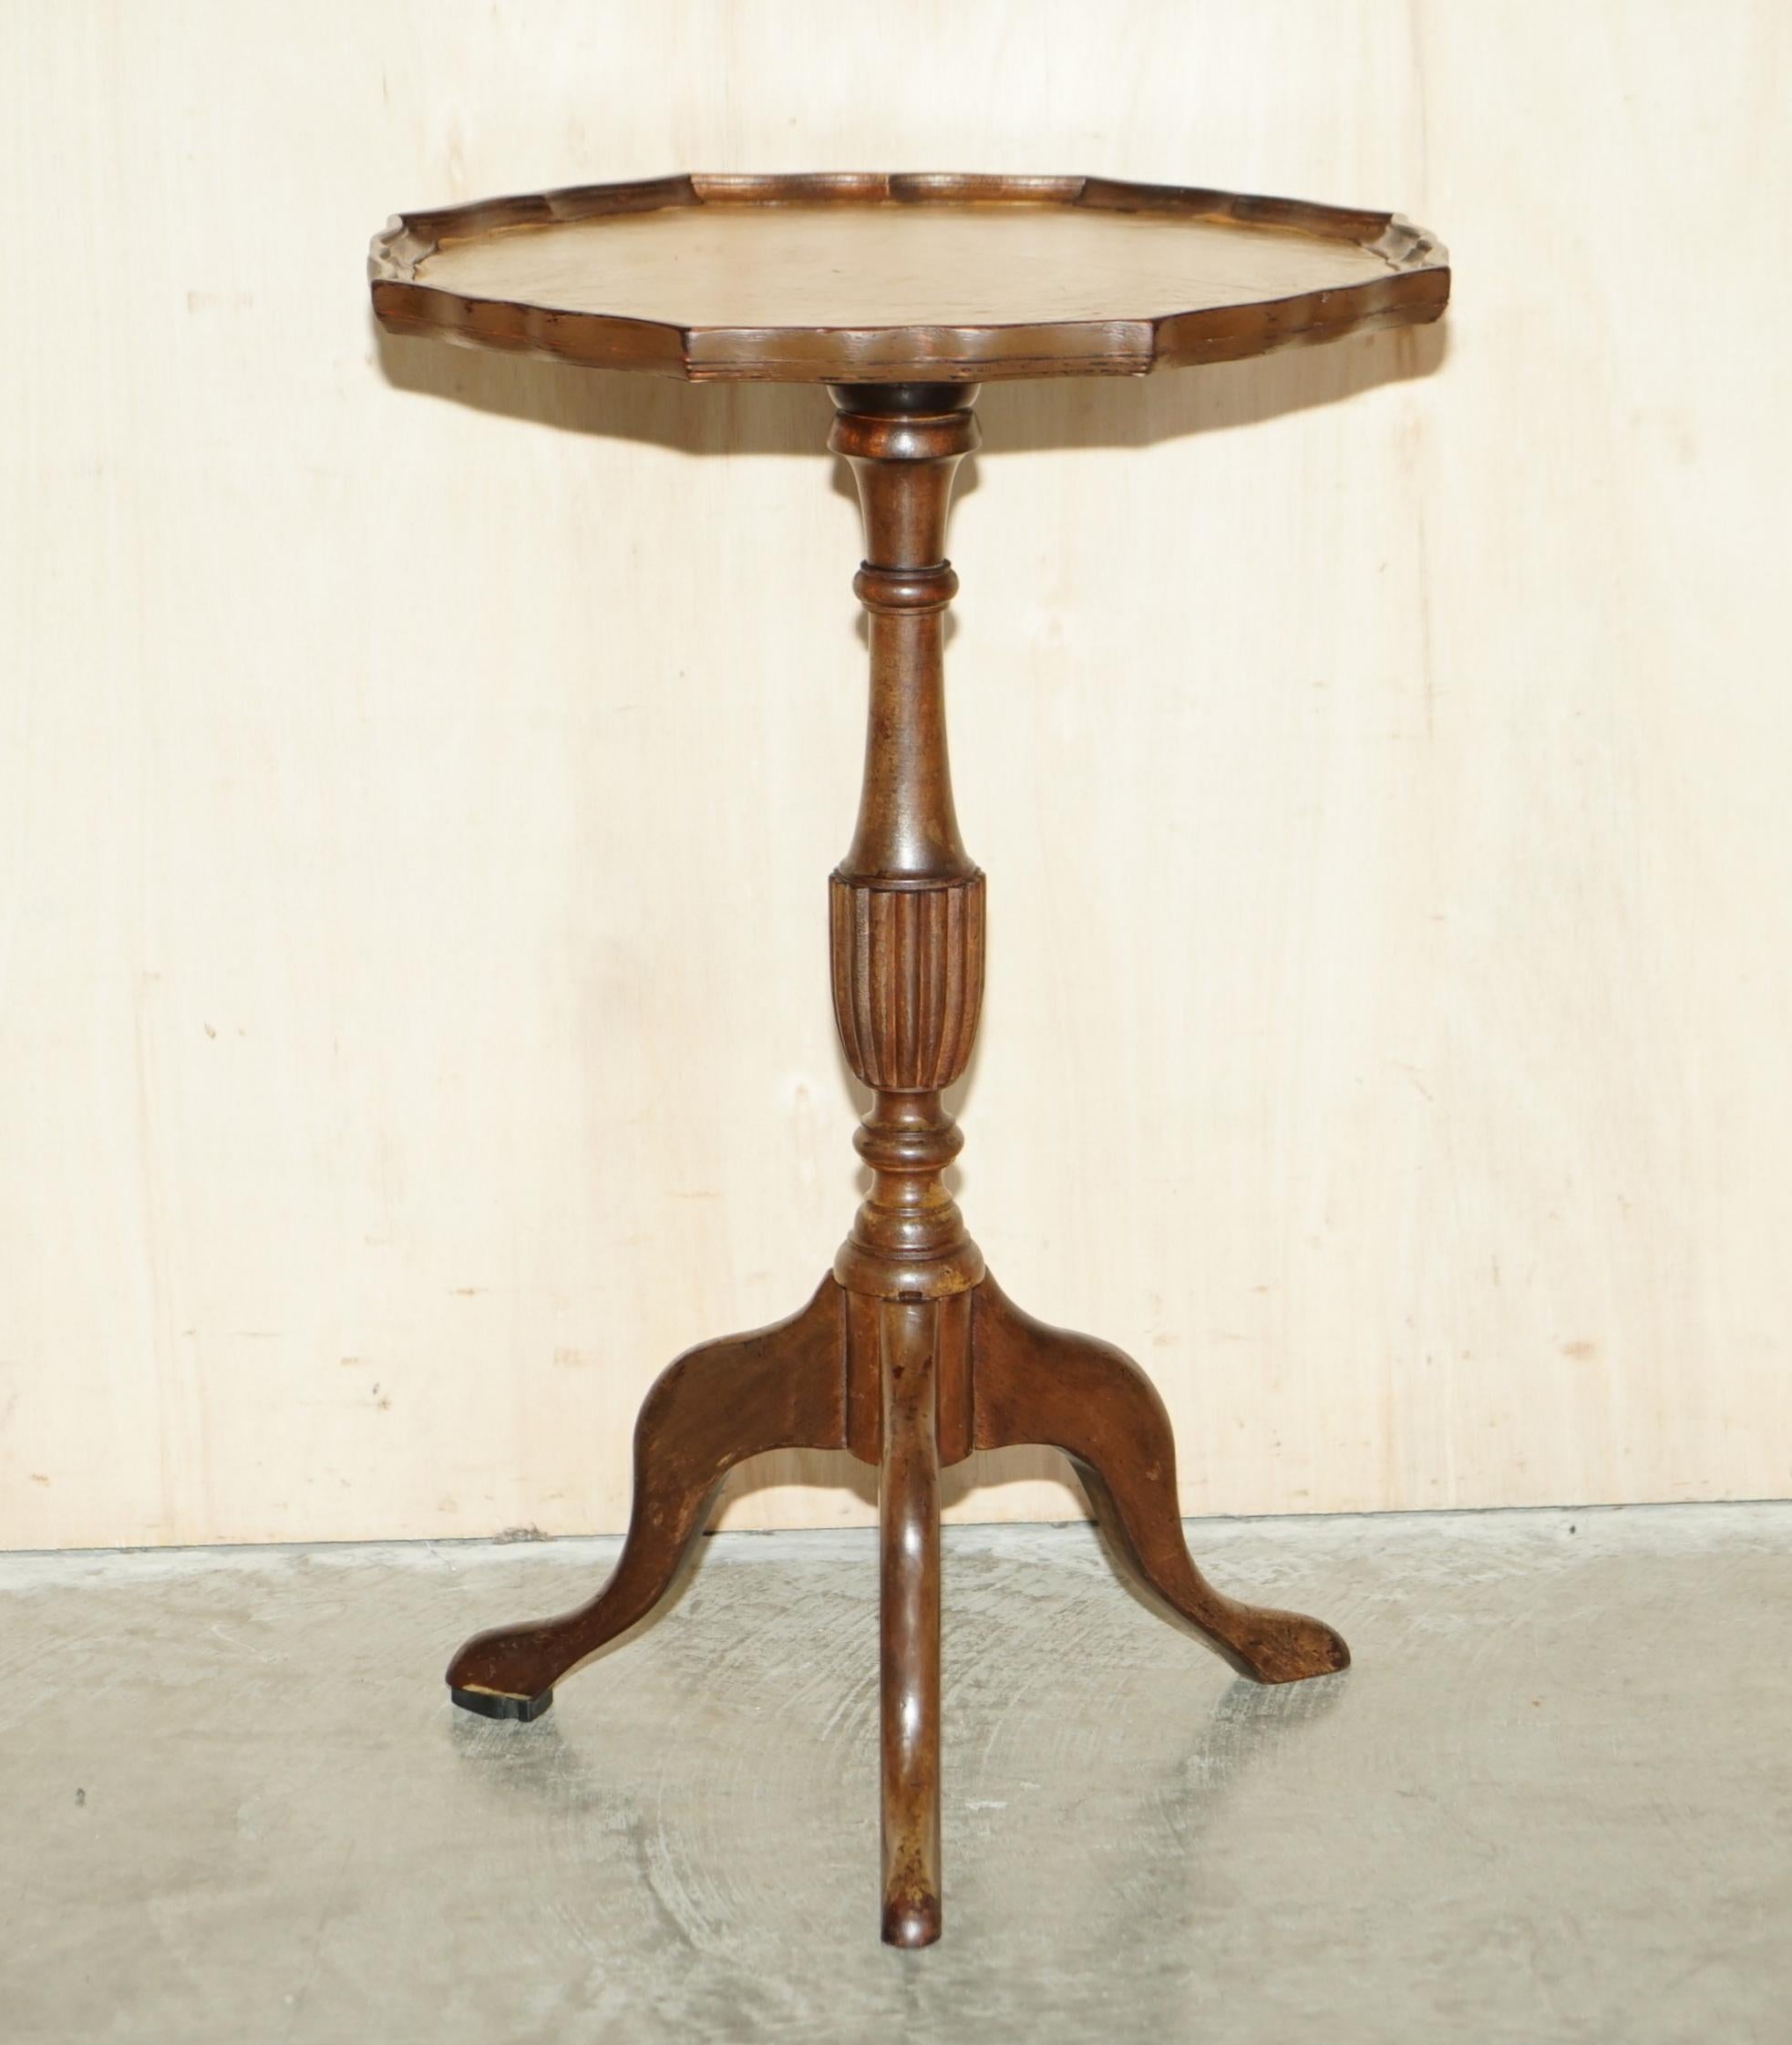 We are delighted to offer for sale this restored vintage Bevan Funnell mahogany & green leather topped tripod table

A good looking and well made piece, ideally suited for a lamp or glass of wine with a picture frame on it

It has been cleaned